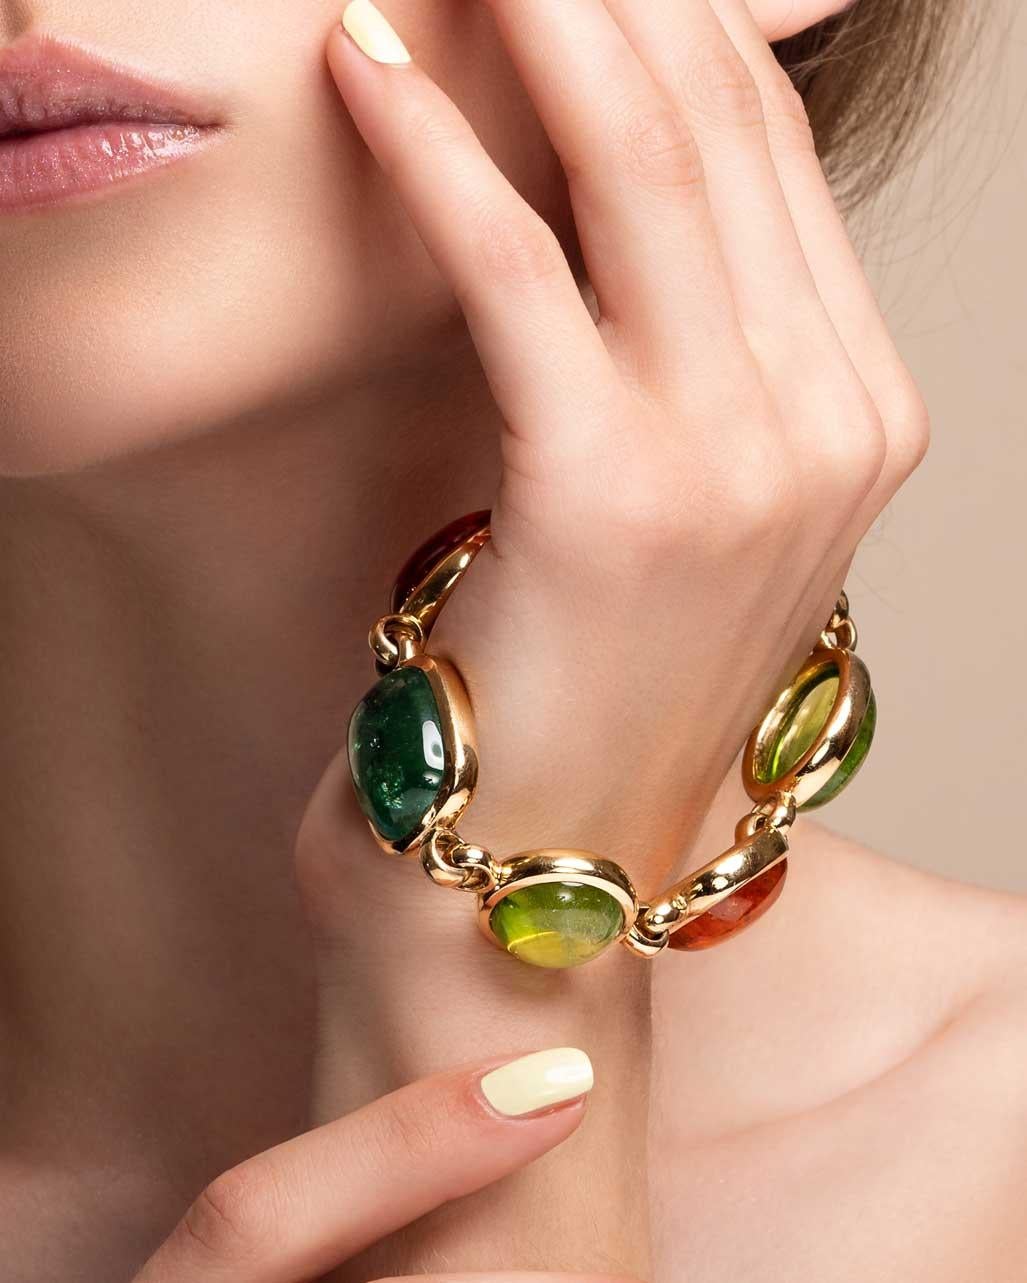 Thomas Leyser is renowned for his contemporary jewellery designs utilizing fine gemstones. 

This 18k rose gold (72.95g) bracelet is set with 6x fine Mandarin Garnet (57.74ct), Green Tourmaline (25.97ct) and Peridot (68.34ct) cabochons.